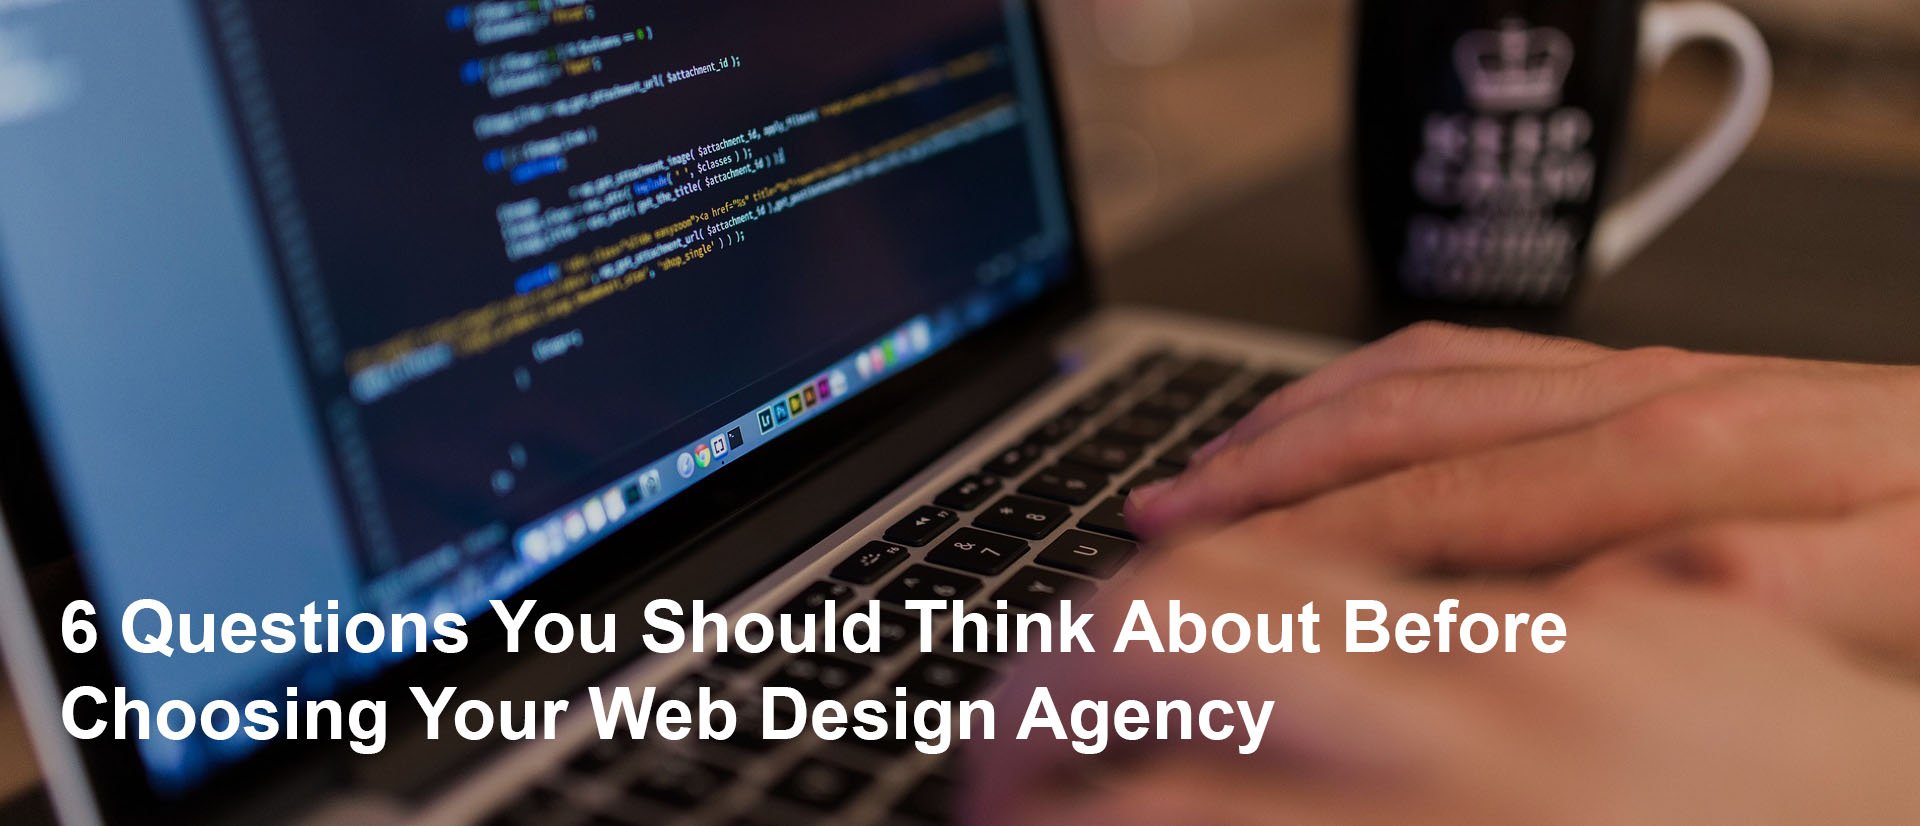 6 Questions You Should Think About Before Choosing Your Web Design Agency